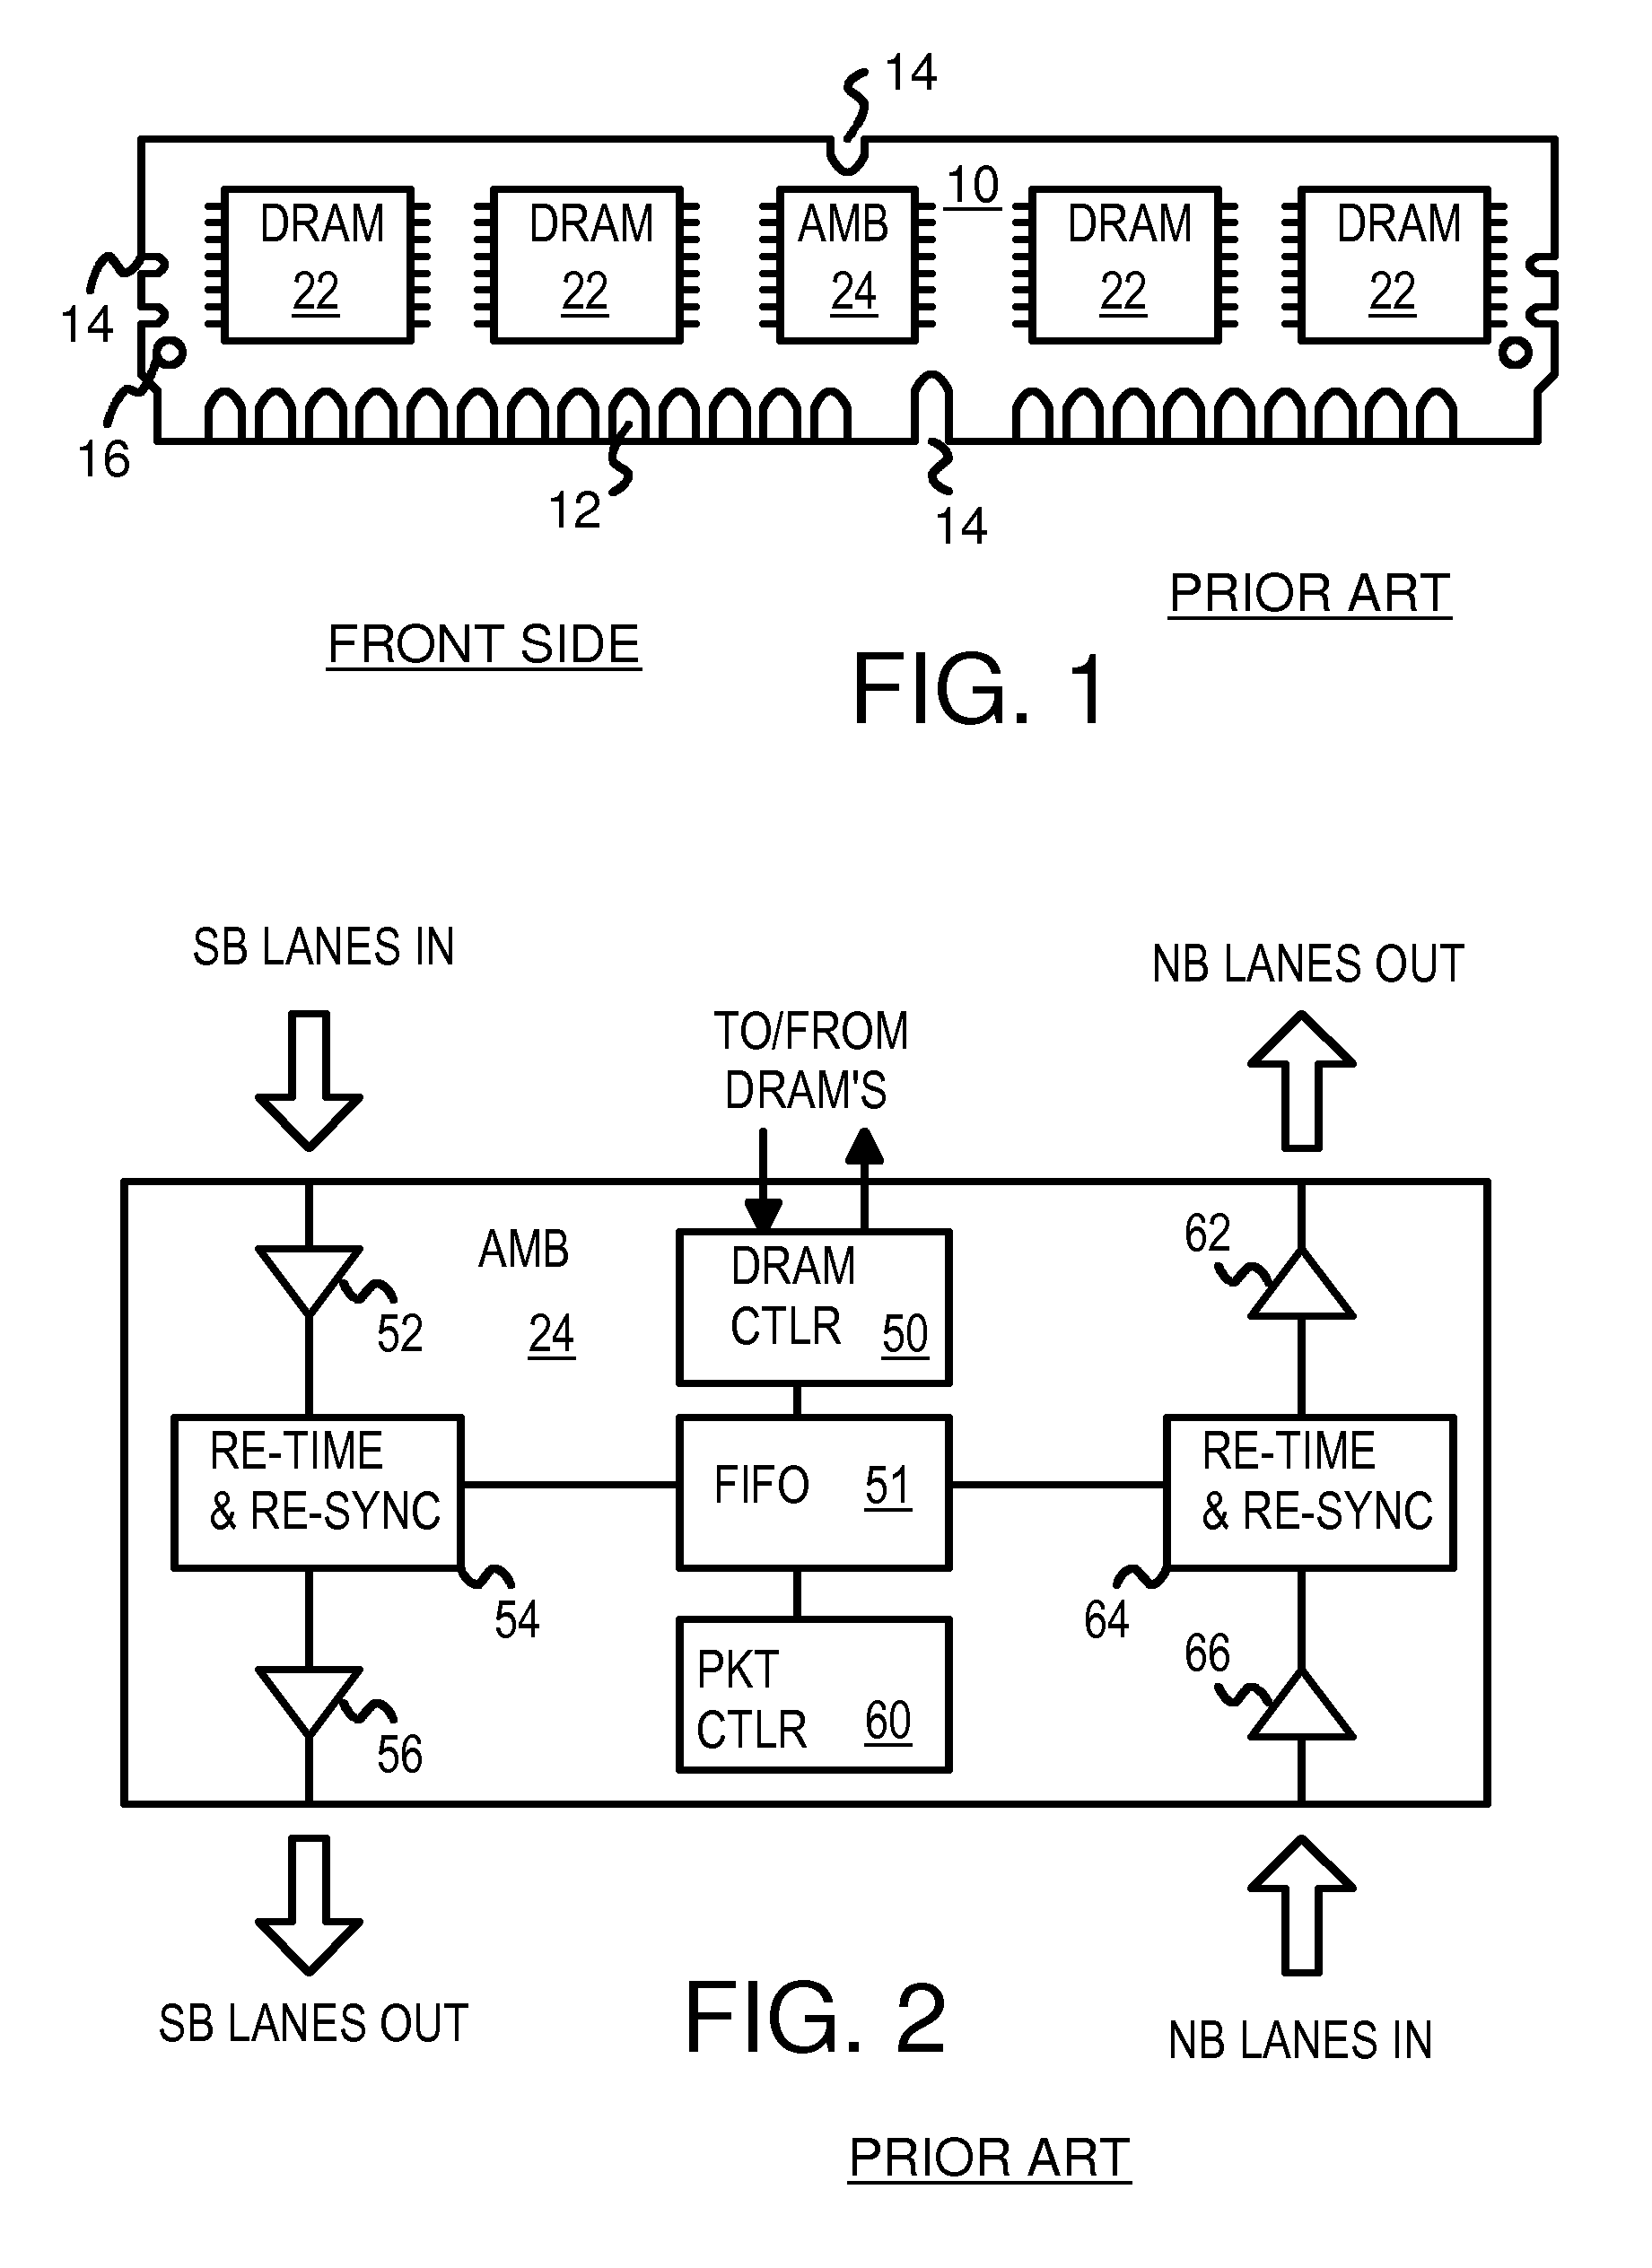 Branching Memory-Bus Module with Multiple Downlink Ports to Standard Fully-Buffered Memory Modules